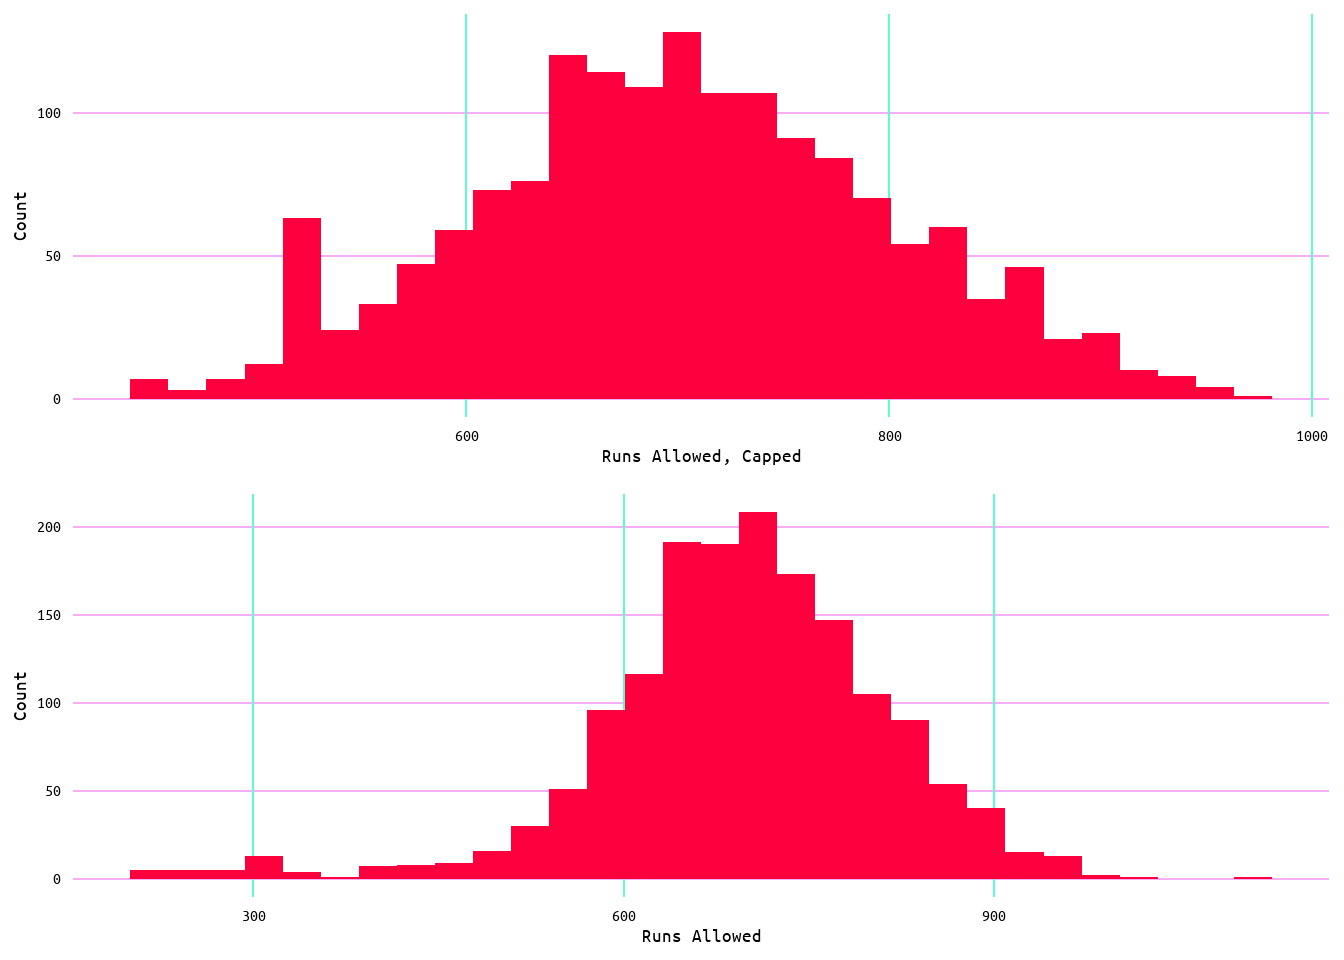 Distribution Comparison of Capped Runs Allowed Values and Unadjusted Runs Allowed Values